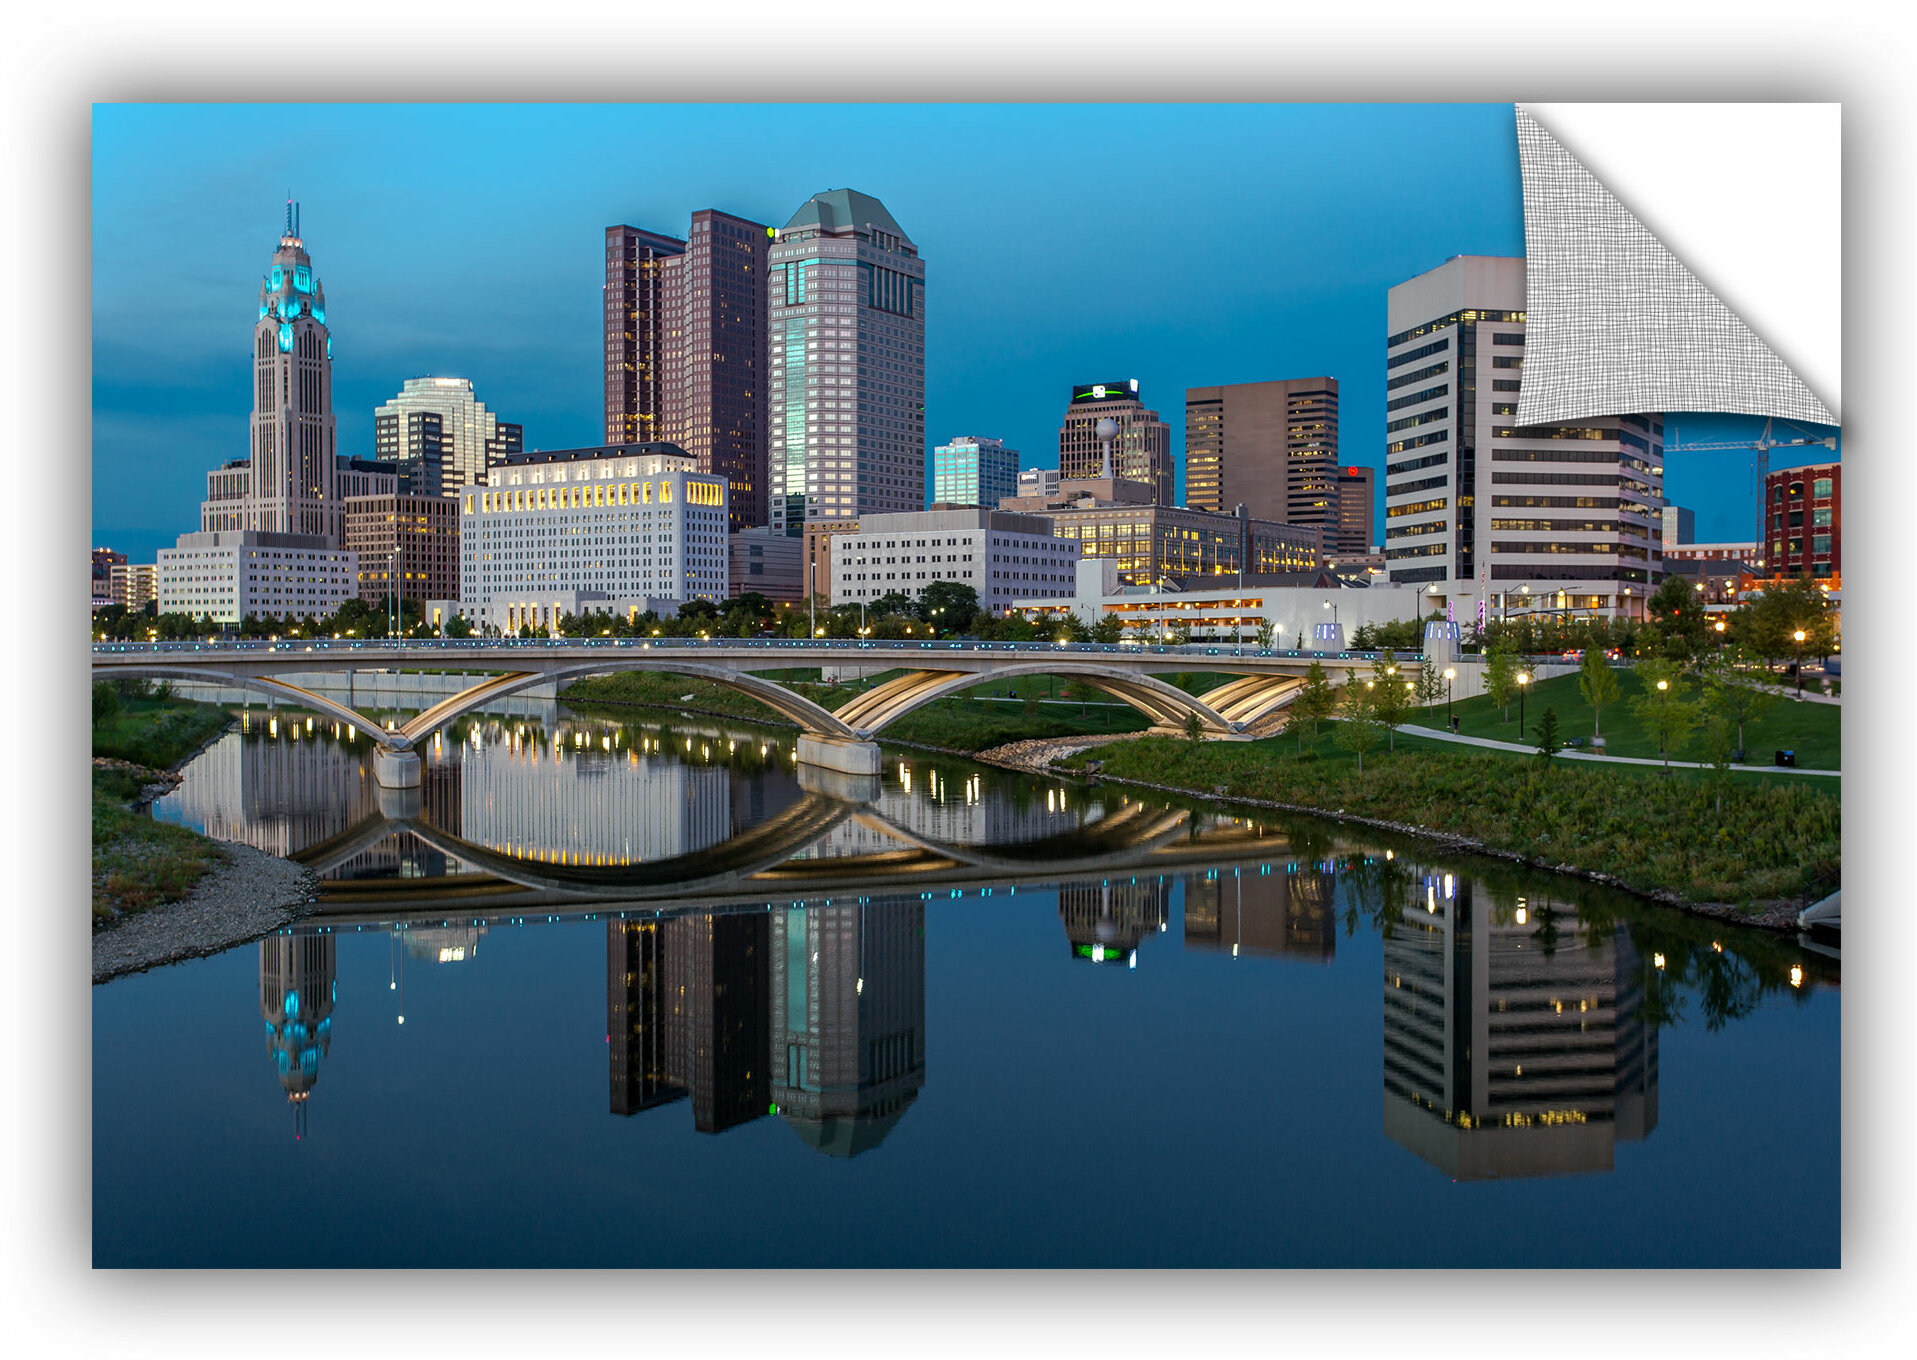 24 by 36 ArtWall Cody Yorks Cleveland Skyline 12 Appeelz Removable Graphic Wall Art